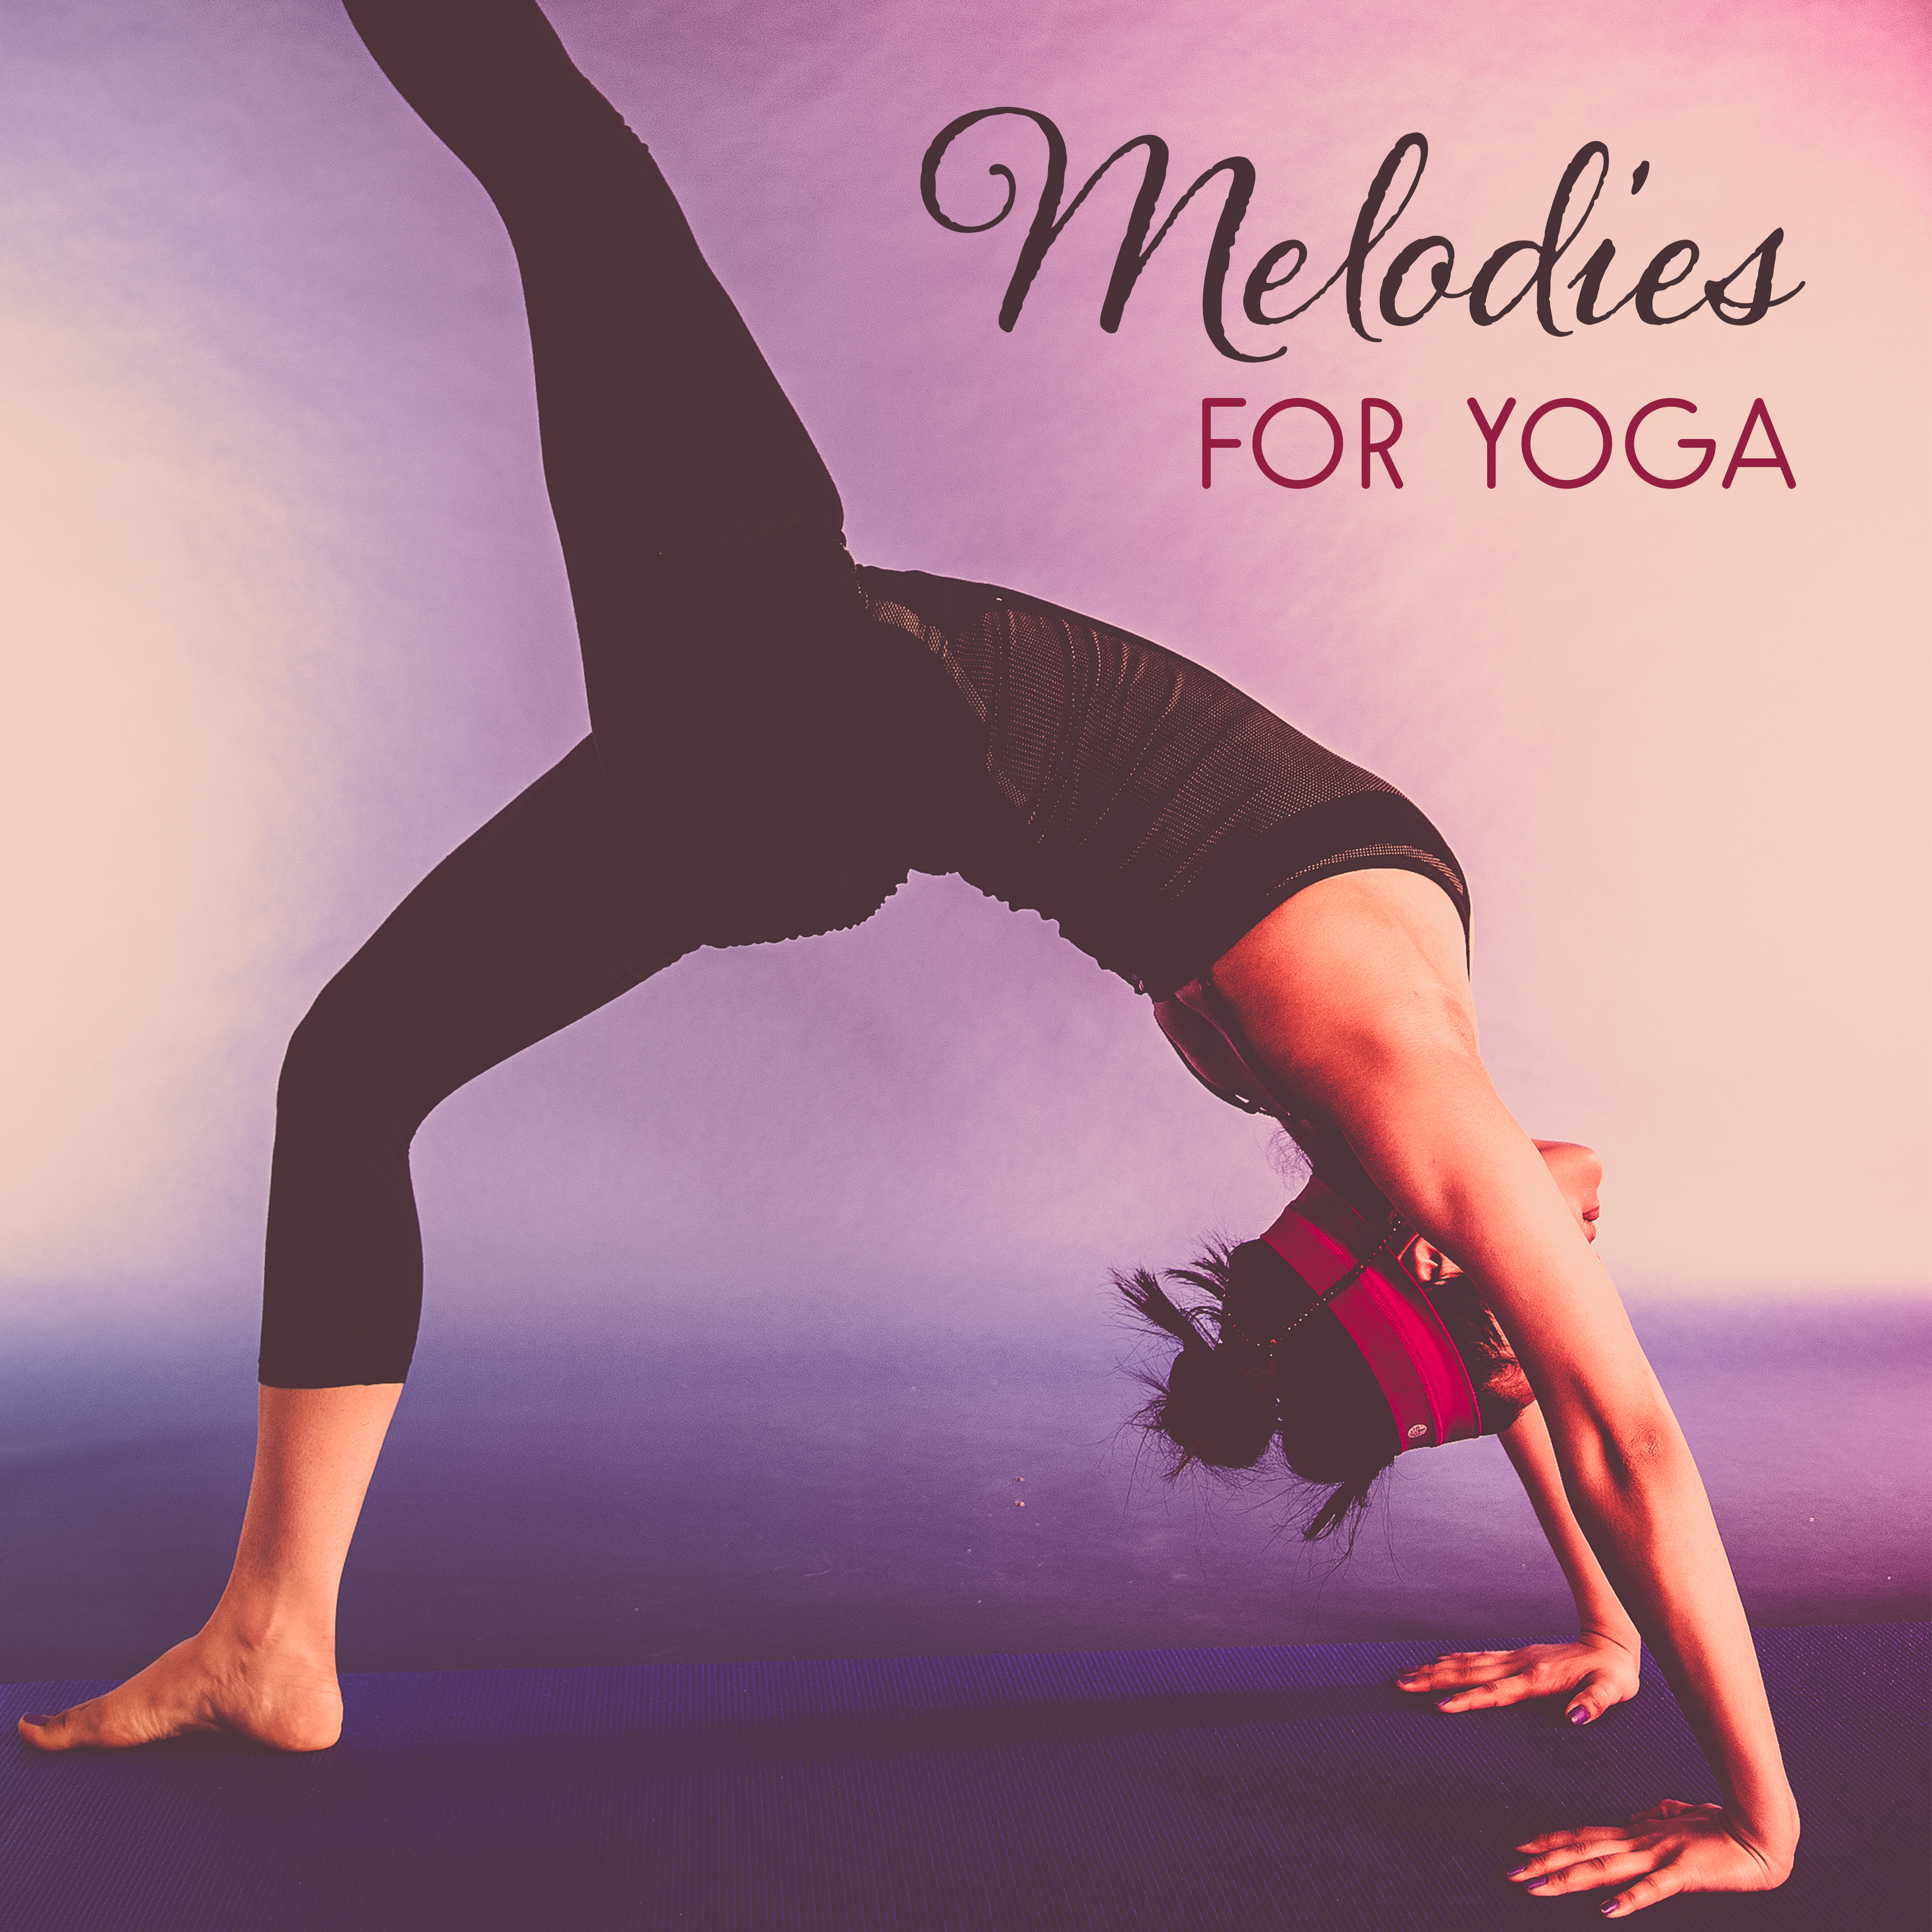 Melodies for Yoga – Morning Meditation, Relaxed Mind, Relax, Hatha Yoga, Inner Healing